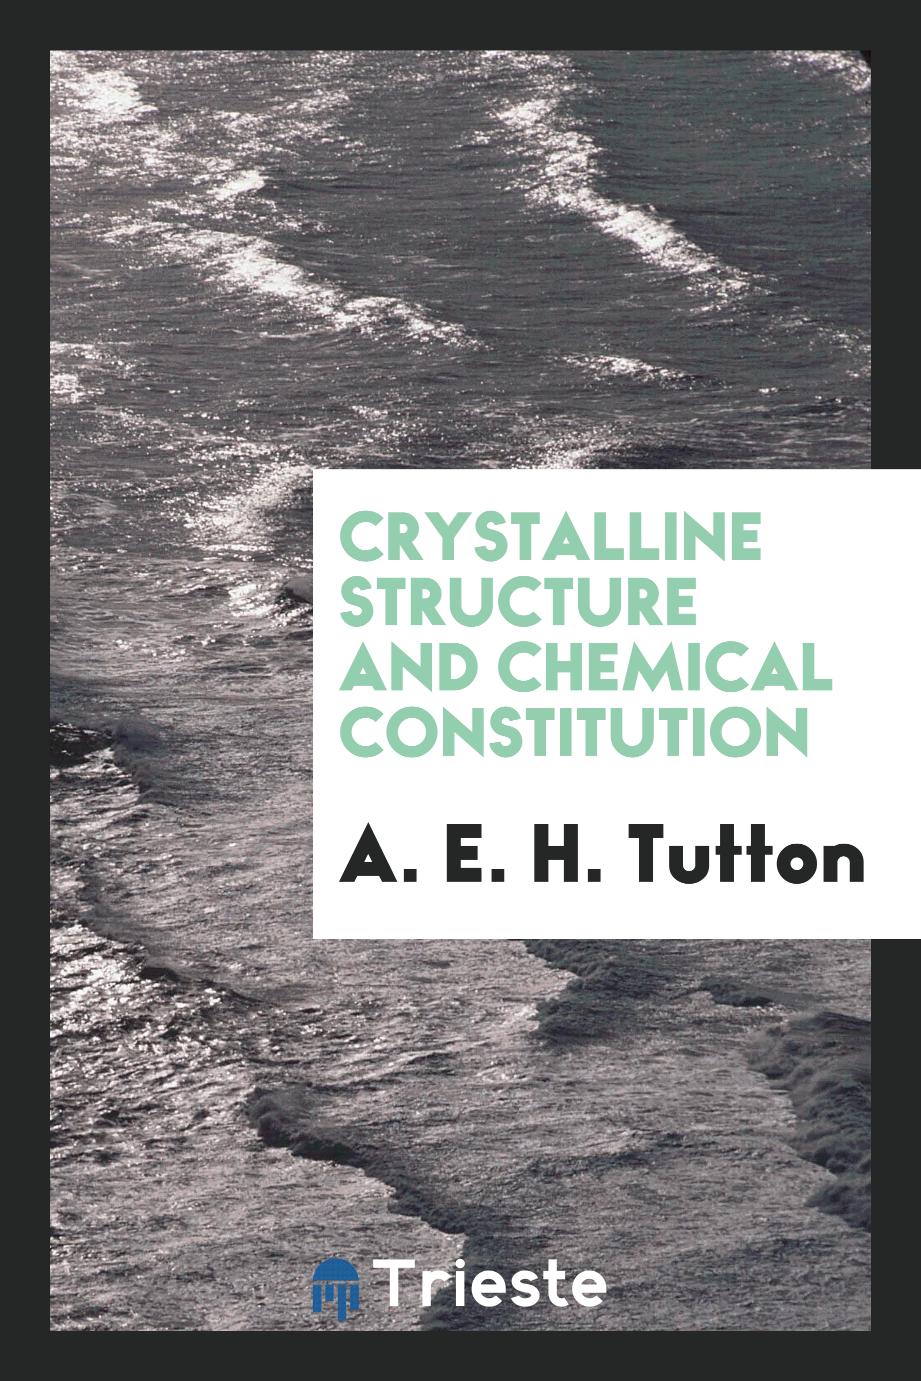 Crystalline structure and chemical constitution